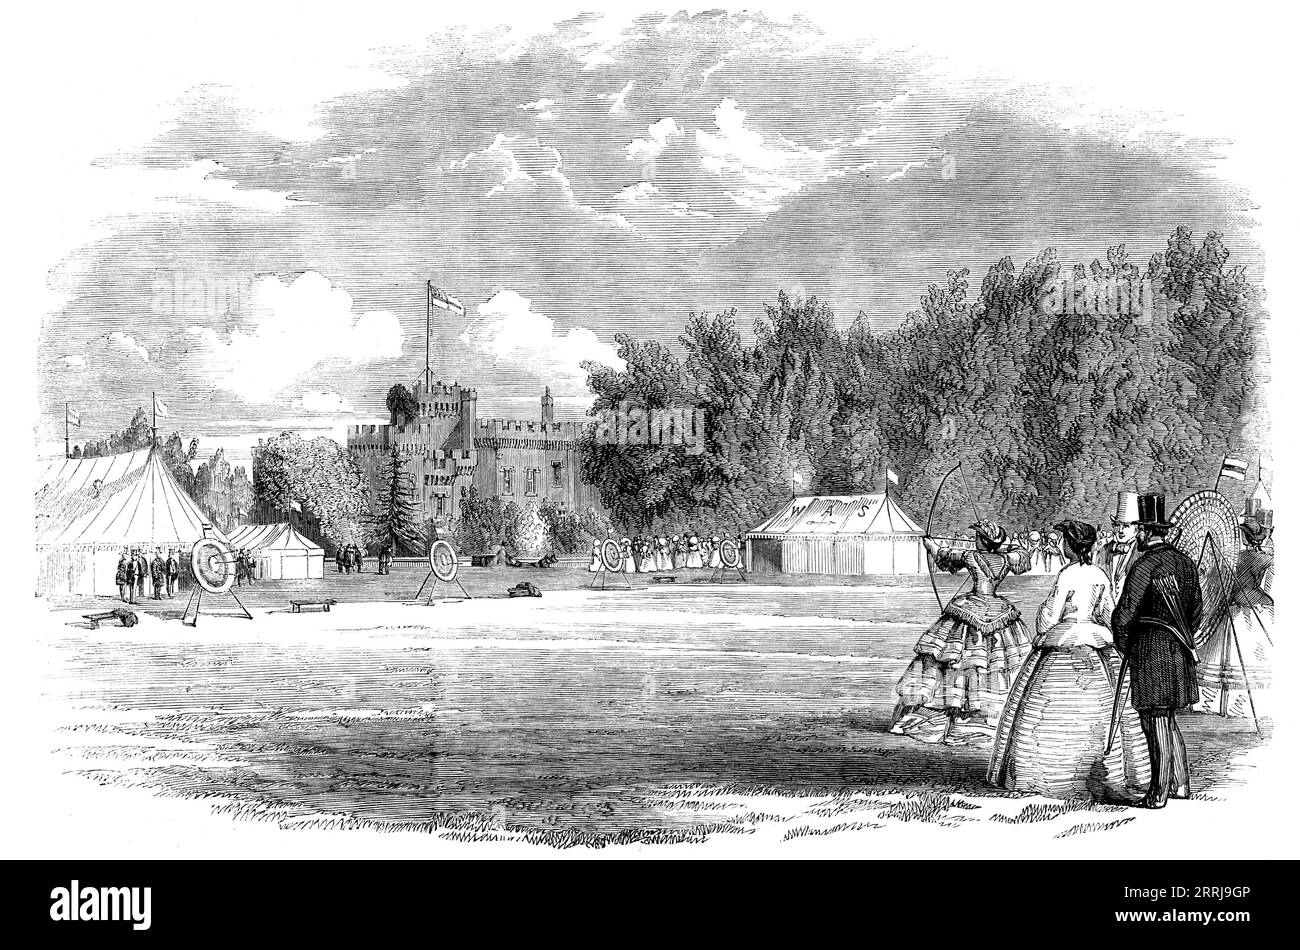 Meeting of the Worcestershire Archery Society in the Grounds of Lea Castle, Wolverley, near Kidderminster, 1858. Women shooting with bow and arrow. 'The targets, six pair in number, were pitched near the Castle. There were four pairs for members and two for visitors; and as the shooting proceeded it was watched with much interest by large numbers of the principal inhabitants of the district. Unfortunately, during the afternoon, rain fell twice, obliging the shooters to take shelter for about half an hour each time, but this delay only appeared to give additional zeal, and the sport recommenced Stock Photo